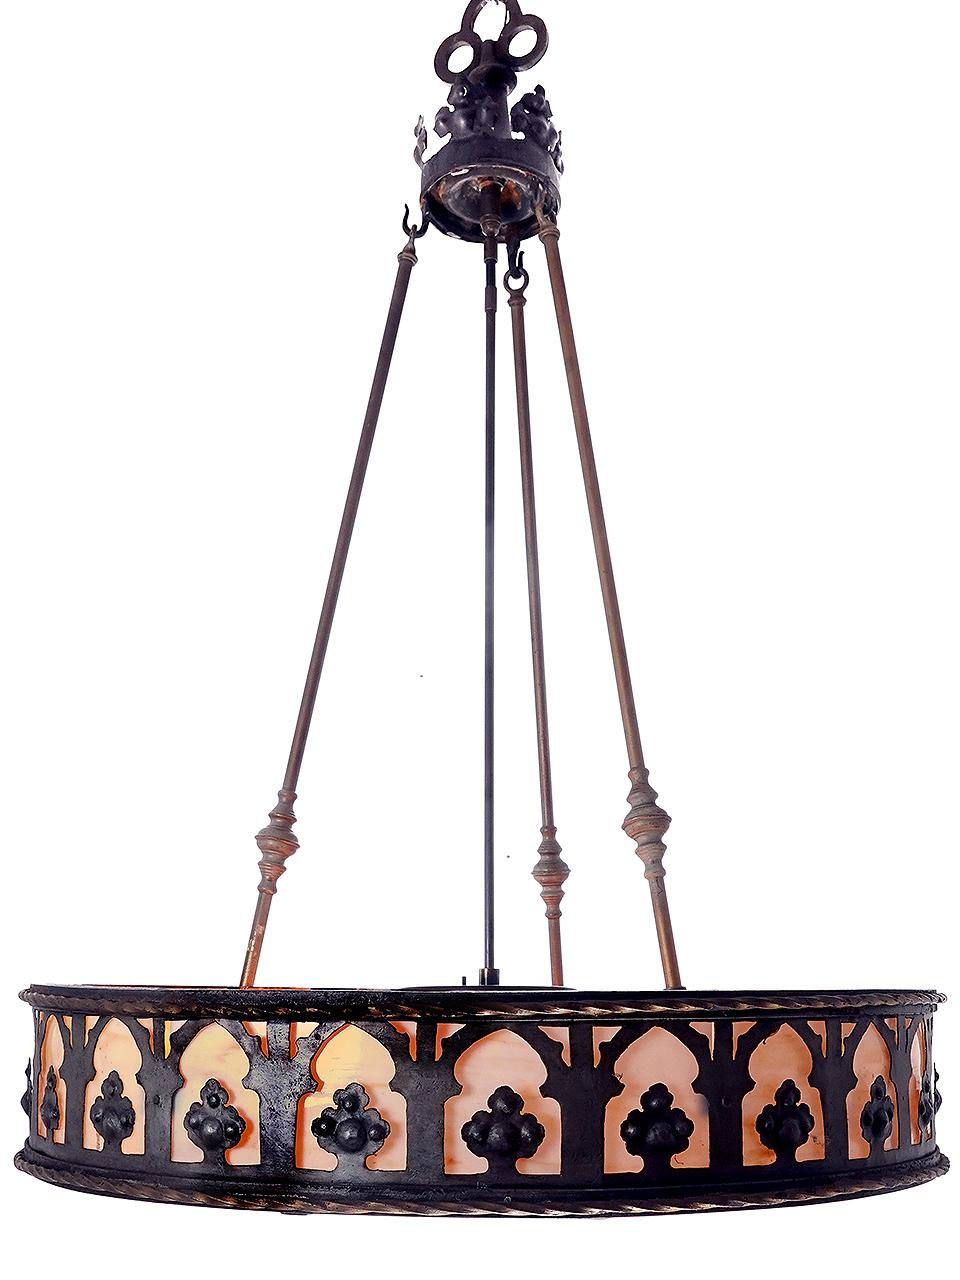 With a diameter of over 32 inches this is a very impressive lamp. its mostly iron and slump stained glass in a cream/amber color. The chandeliers most unique feature are the 7 round spotlight grills that fill the bottom. Each grill lifts off to